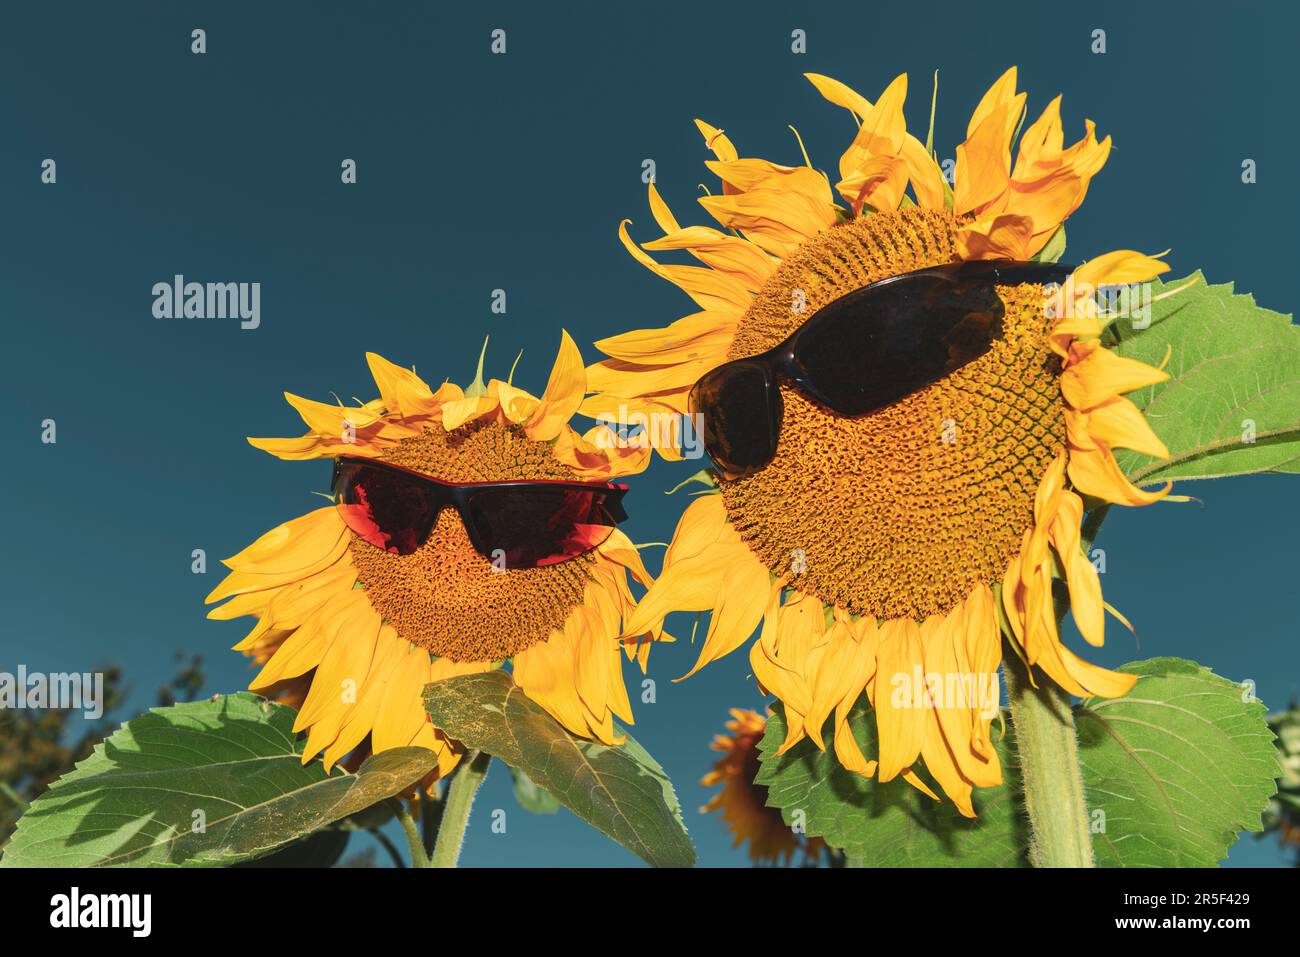 Funny sunflower couple wearing sunglasses.  Symbol of summer. Happy flowers Stock Photo